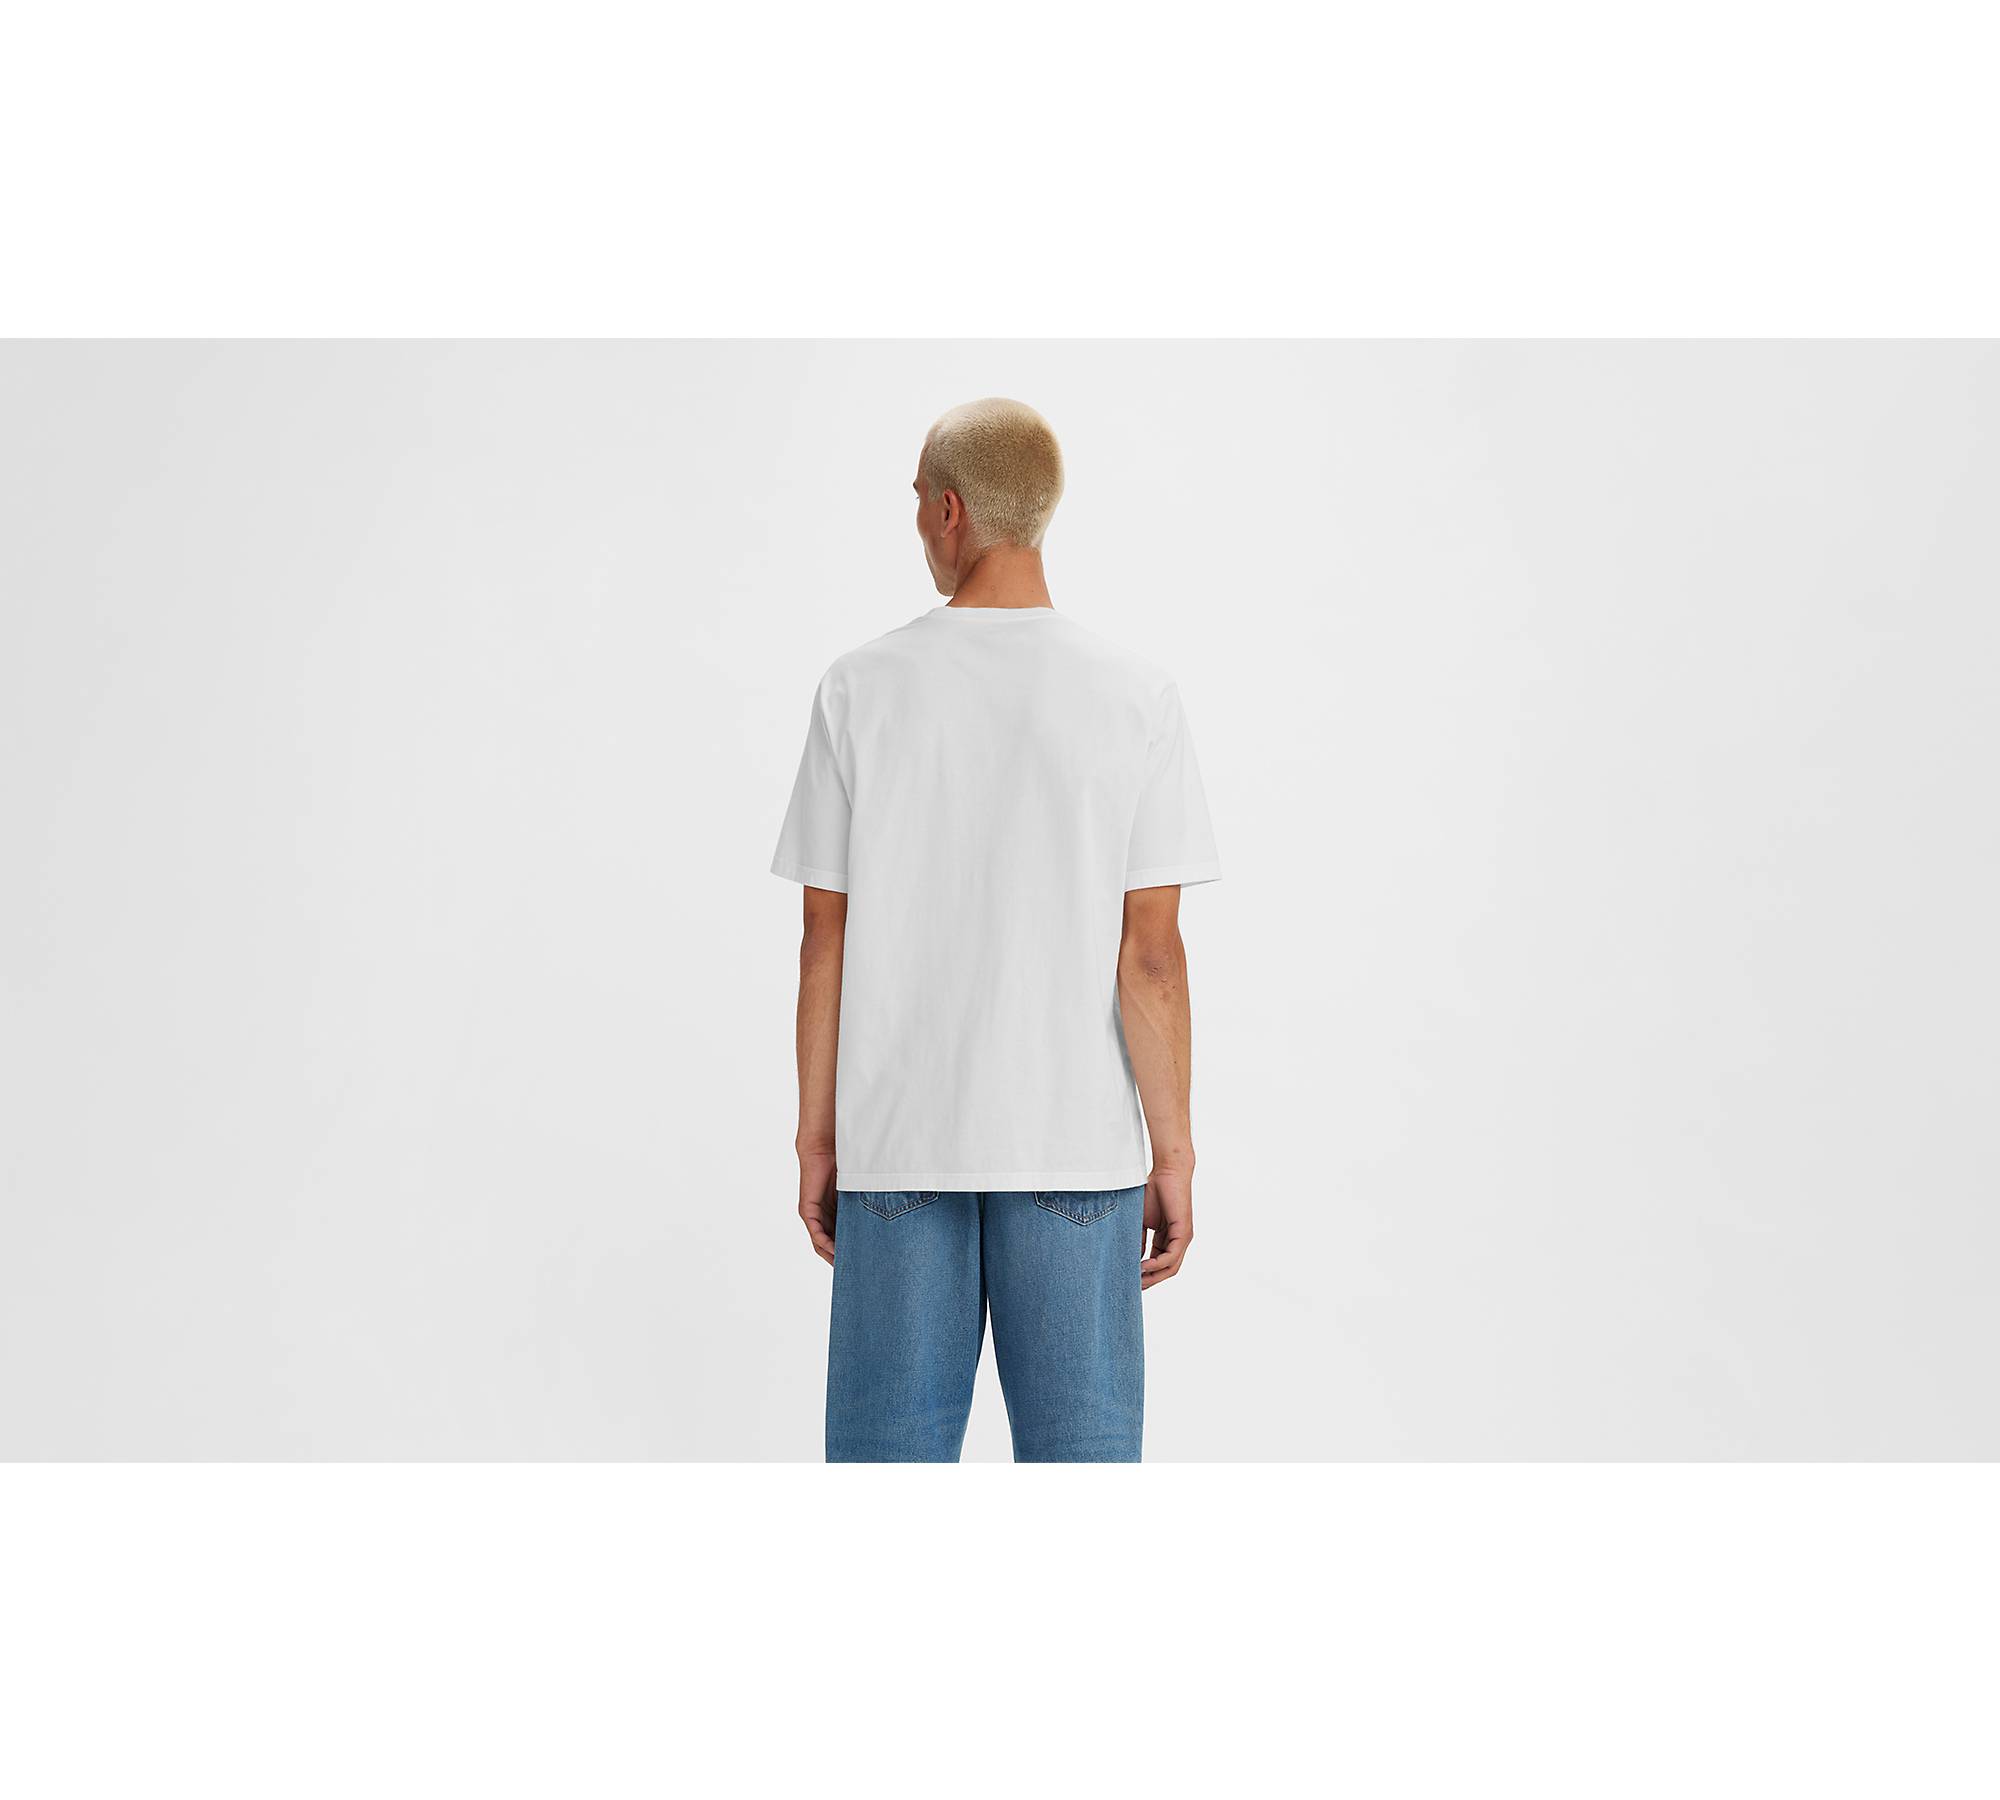 Relaxed Fit Short Sleeve T-shirt - Multi-color | Levi's® US